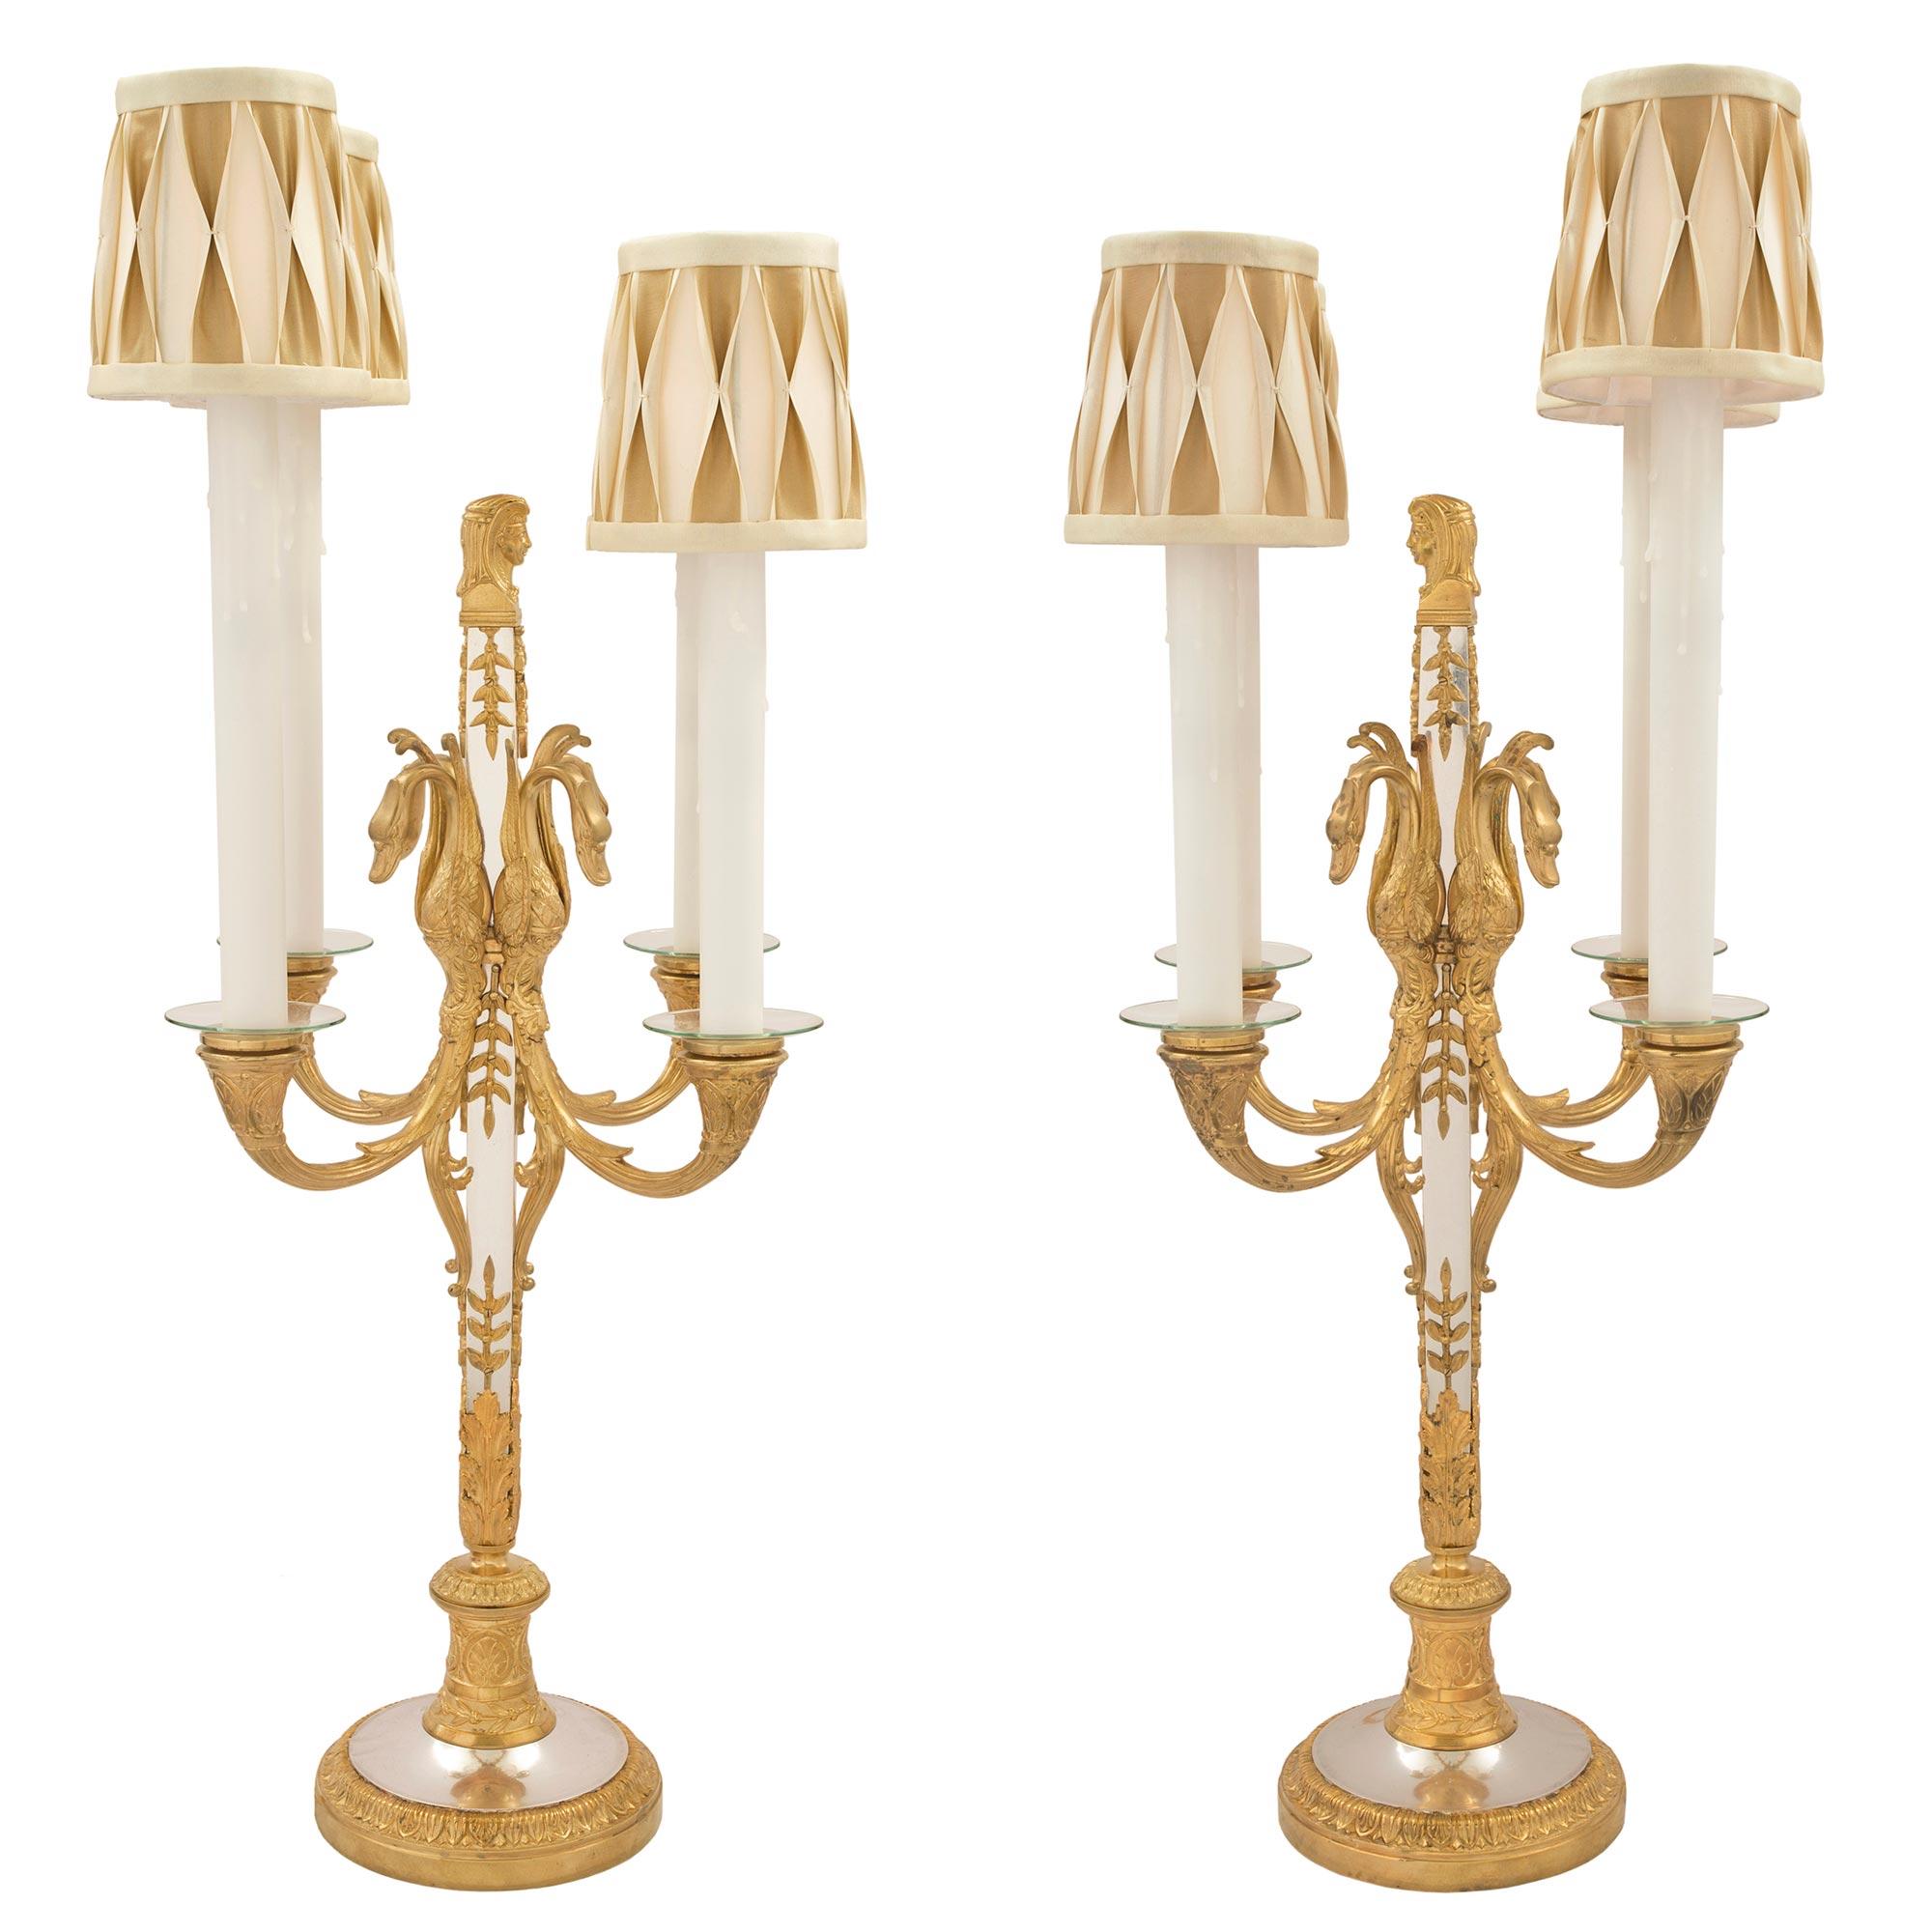 A sensational and most elegant pair of French mid 19th century Neo-Classical st. four arm electrified candelabras in ormolu and silvered bronze. The pair are raised by circular ormolu bases with a mottled edge and a Coeur de Rai design. Above is the